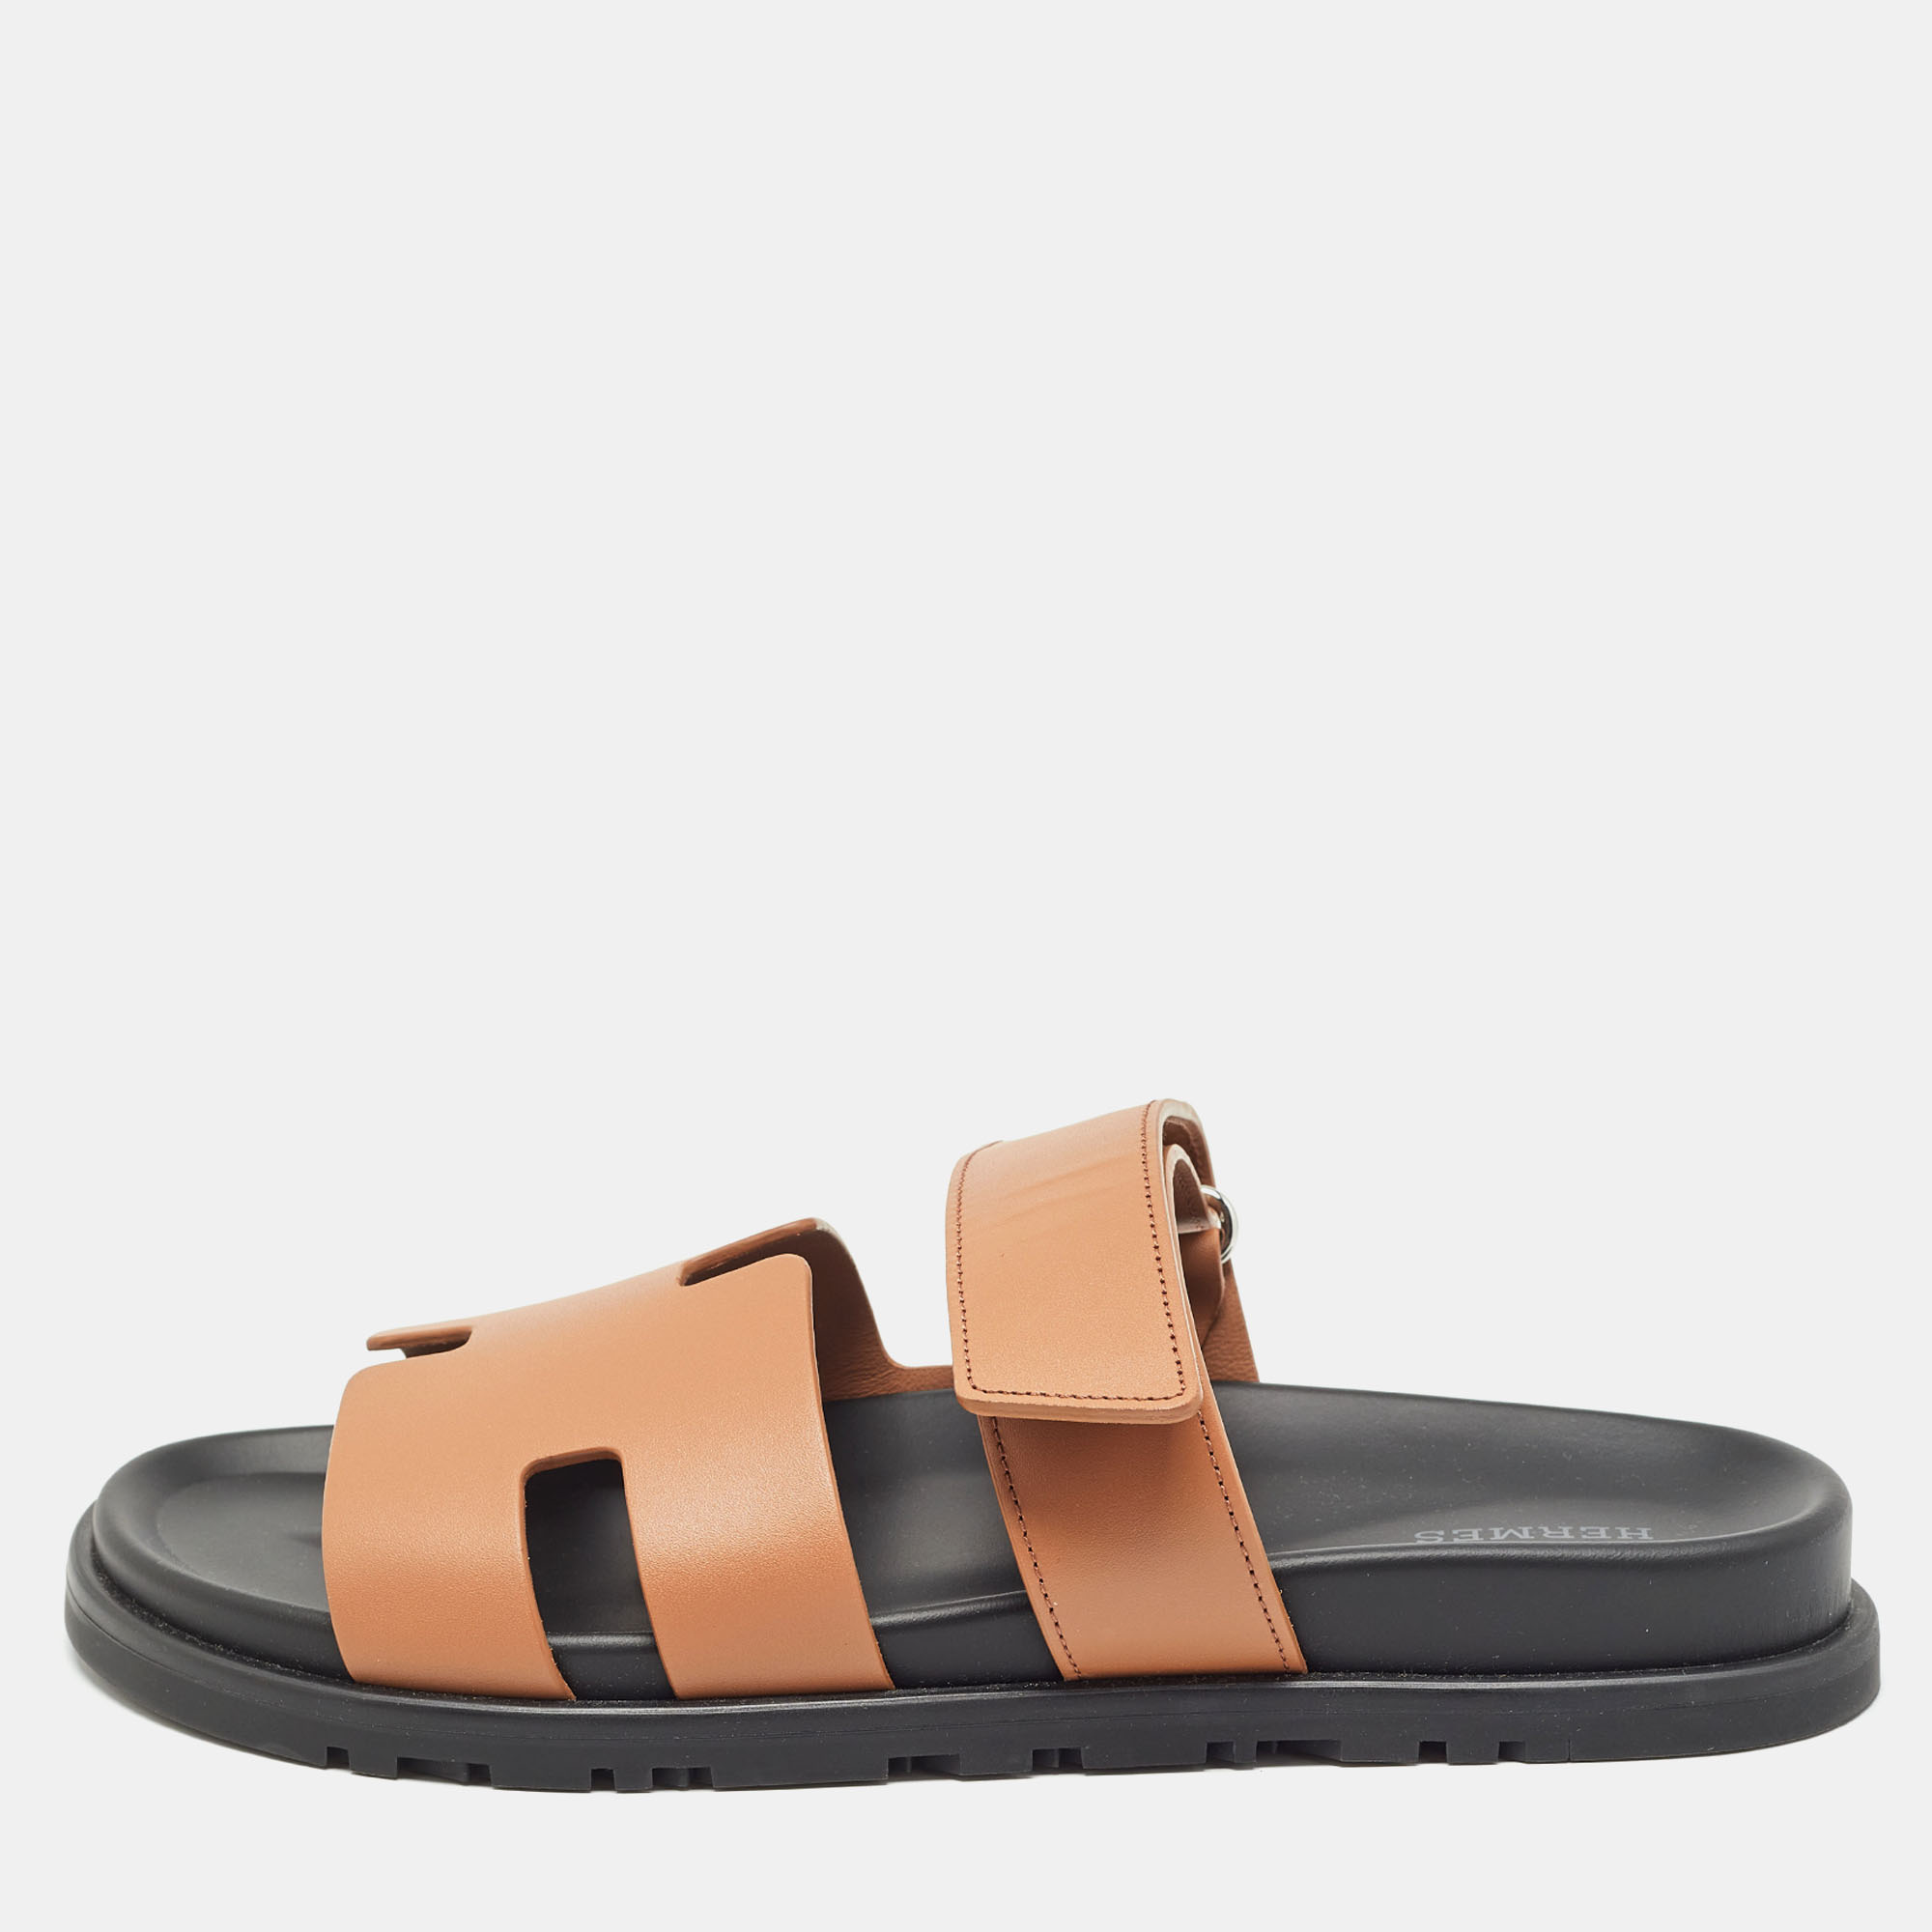 Hermes brown leather chypre sandals size 40